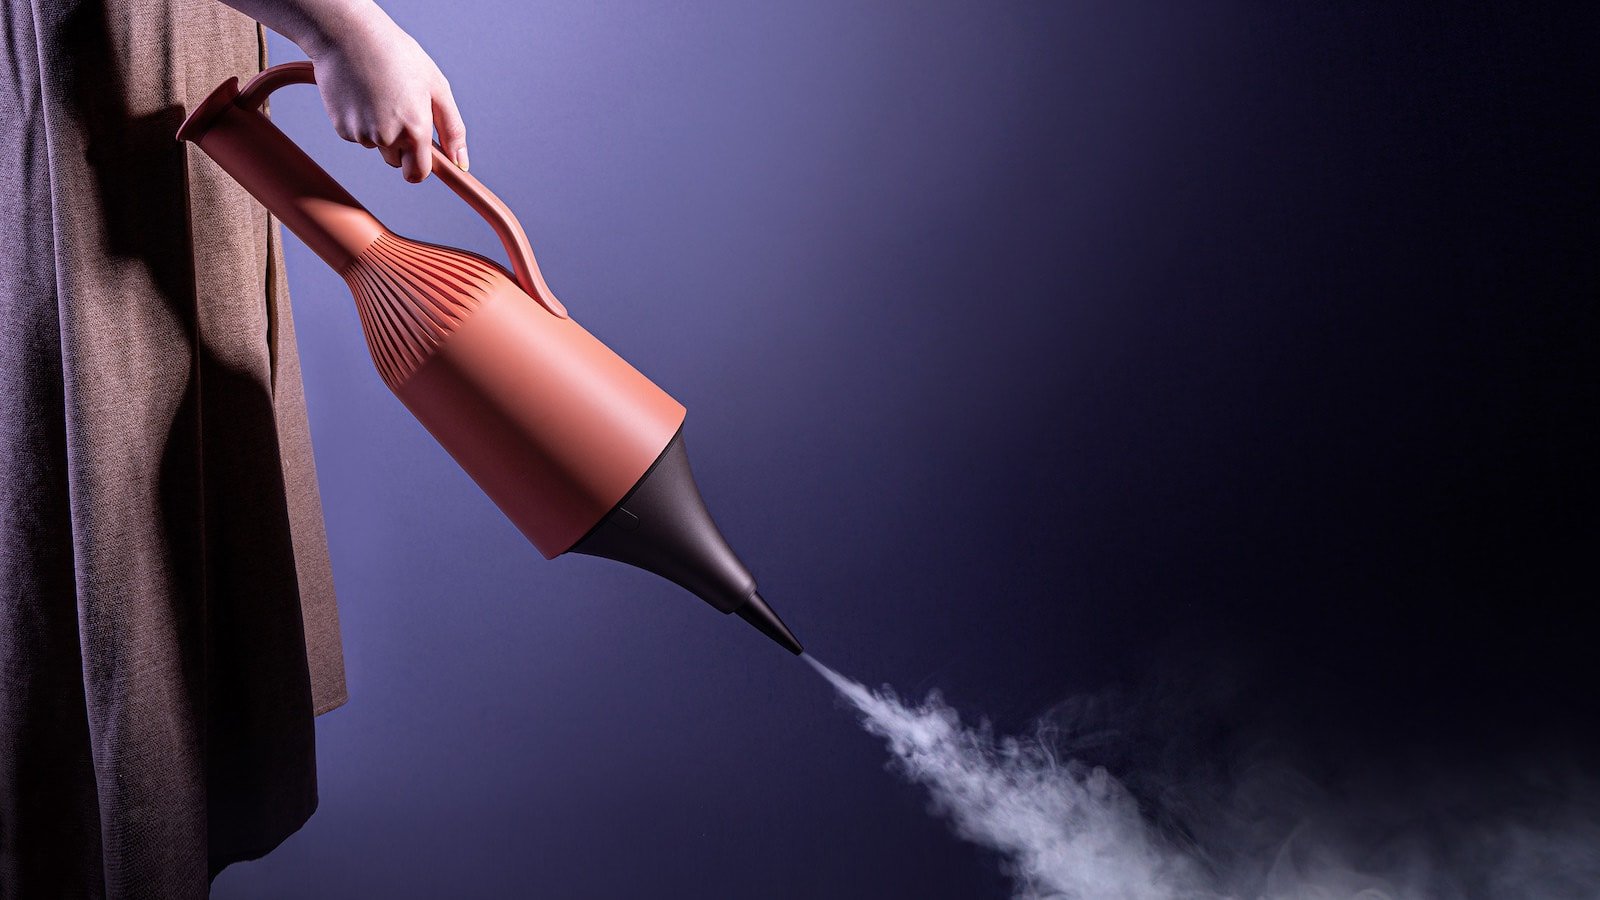 VASE steam cleaner blends a functional gadget with a beautiful design